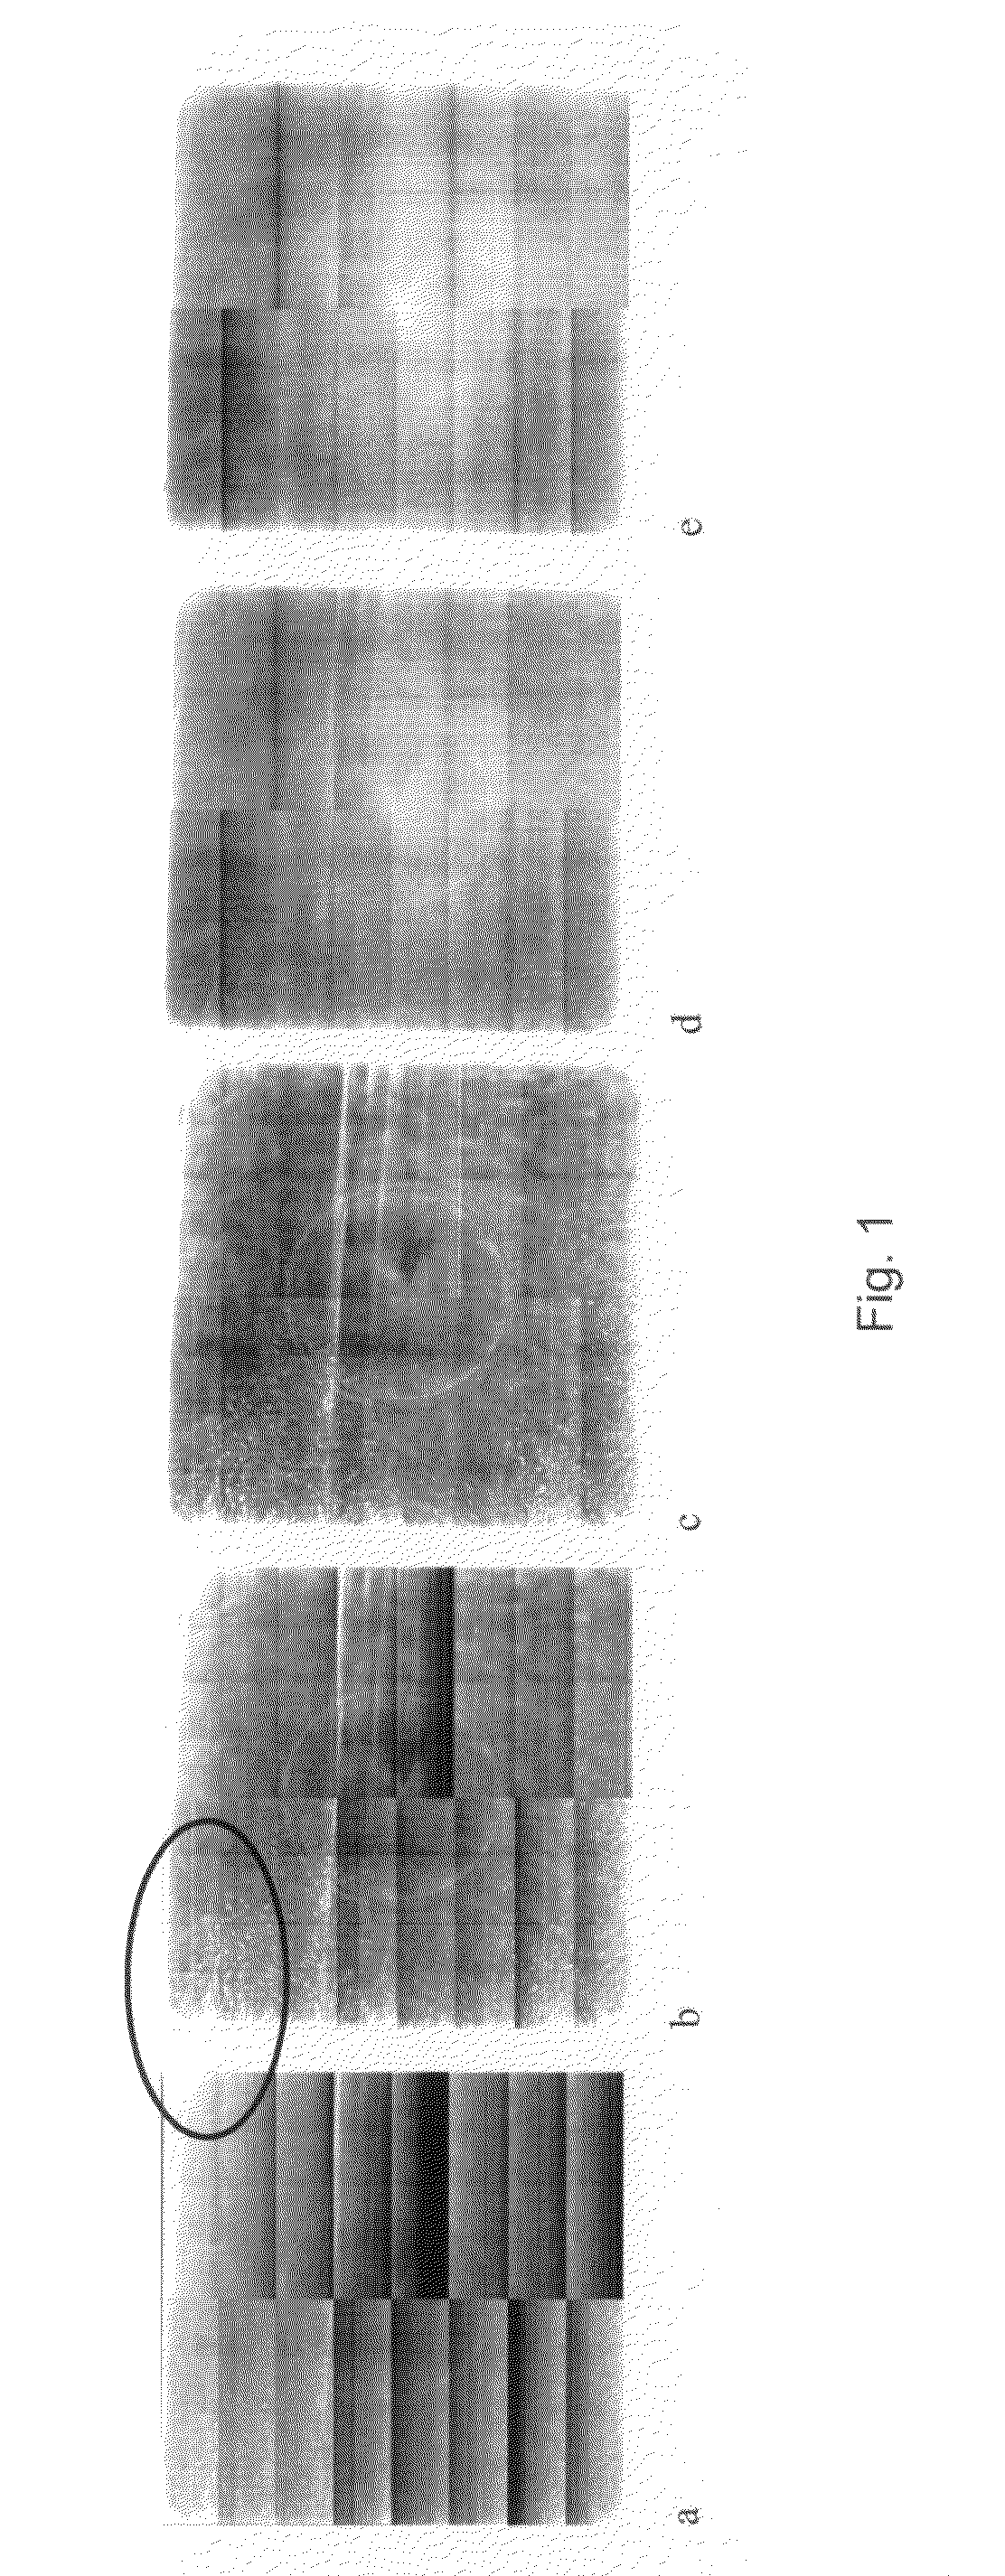 Methods for improving image quality of image detectors, and systems therefor